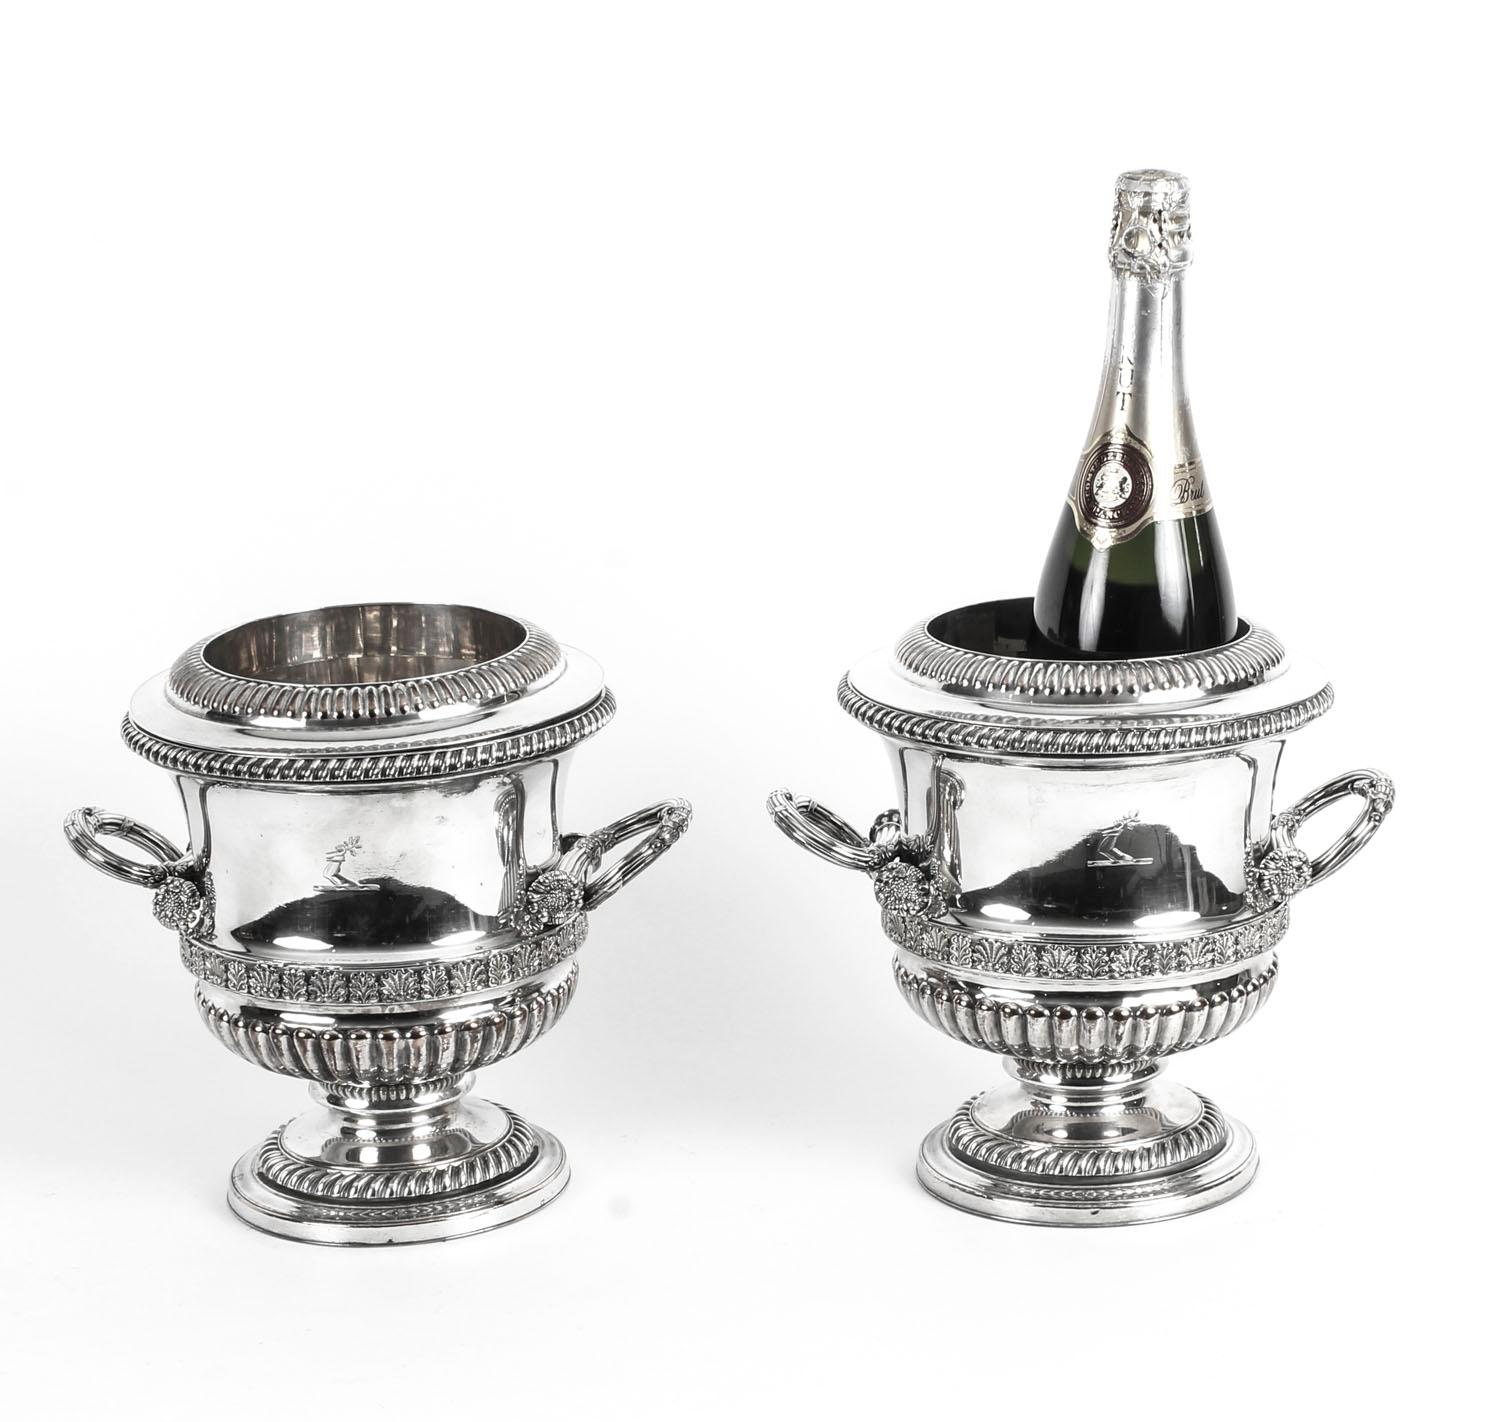 Antique Pair of Old Sheffield Regency Wine Coolers, 19th Century 14